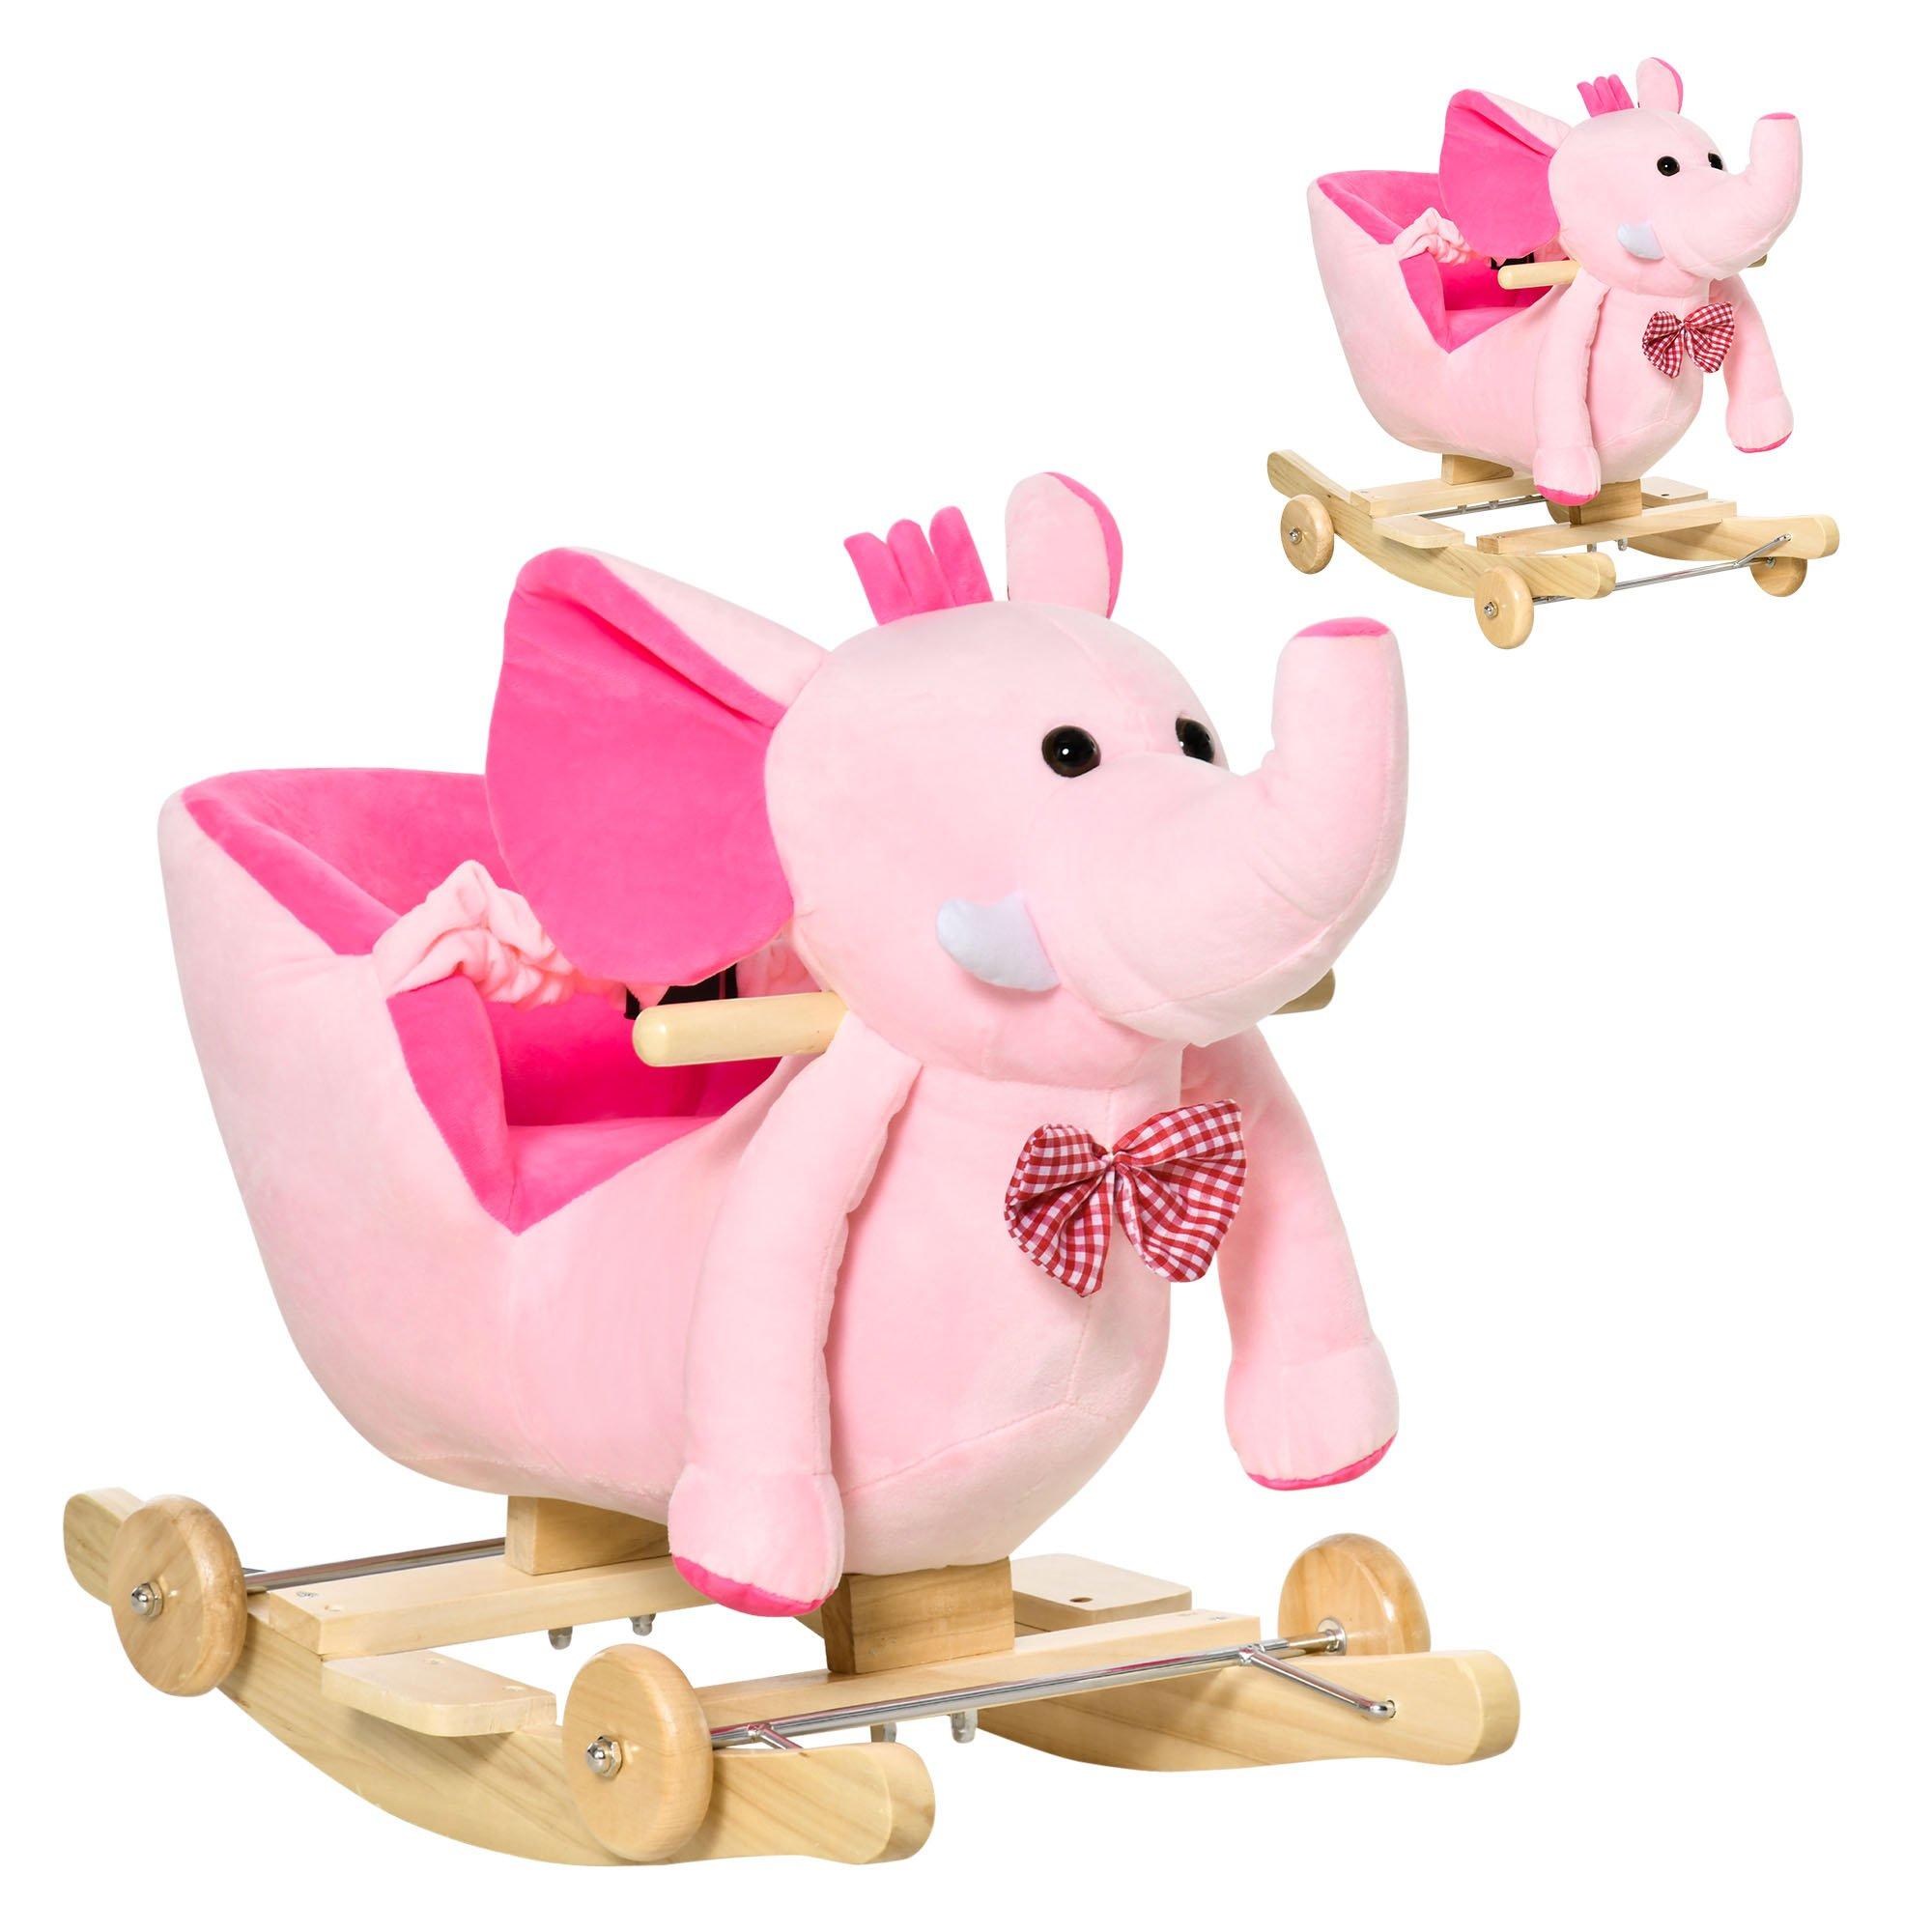 HOMCOM 2 In 1 Kids Rocking Horse Ride on Elephant Plush Rocker Toy with Music Pink